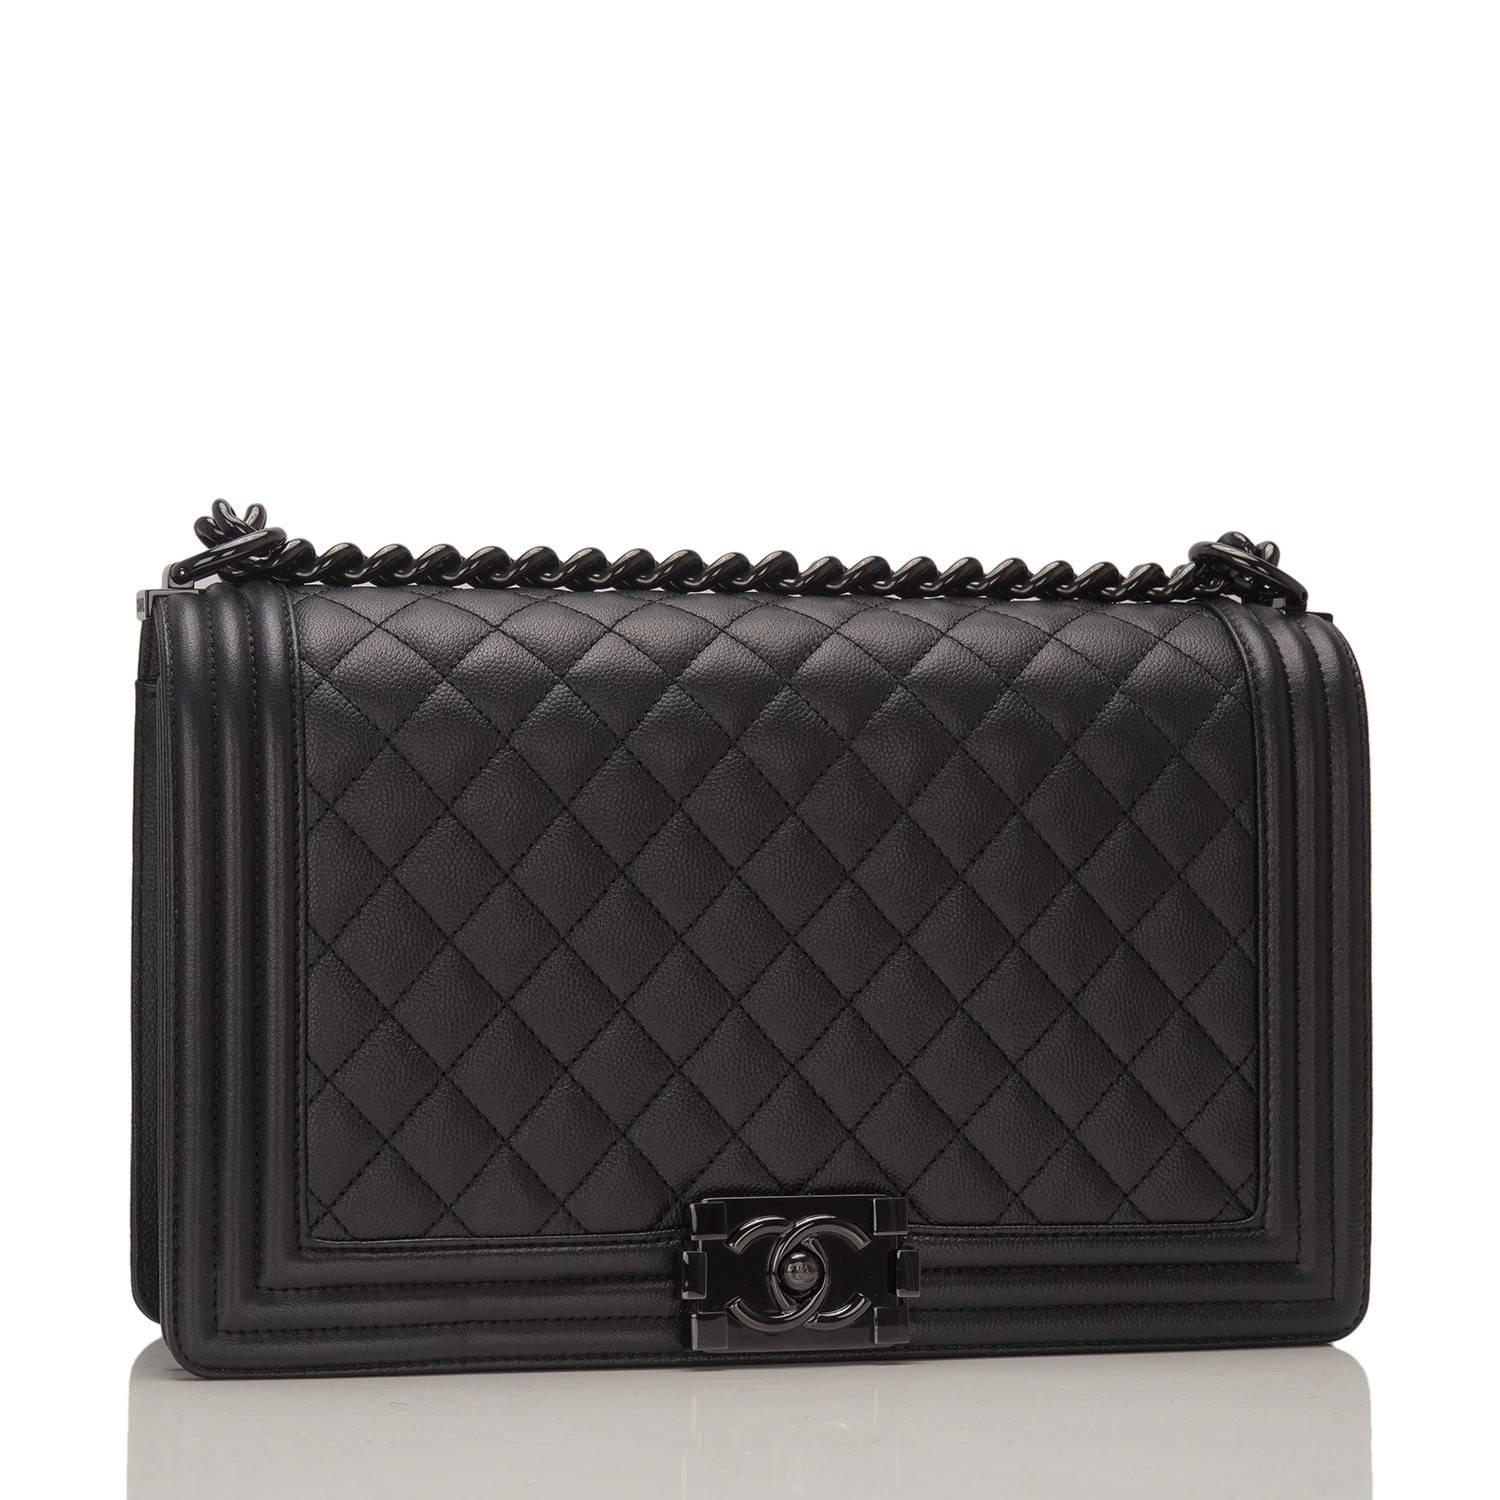 Chanel New Medium Boy bag of black quilted grained lambskin and black hardware.

This Chanel bag is in the classic Boy style with a full front flap with the Boy signature CC push lock closure detail and black chain link and black leather padded